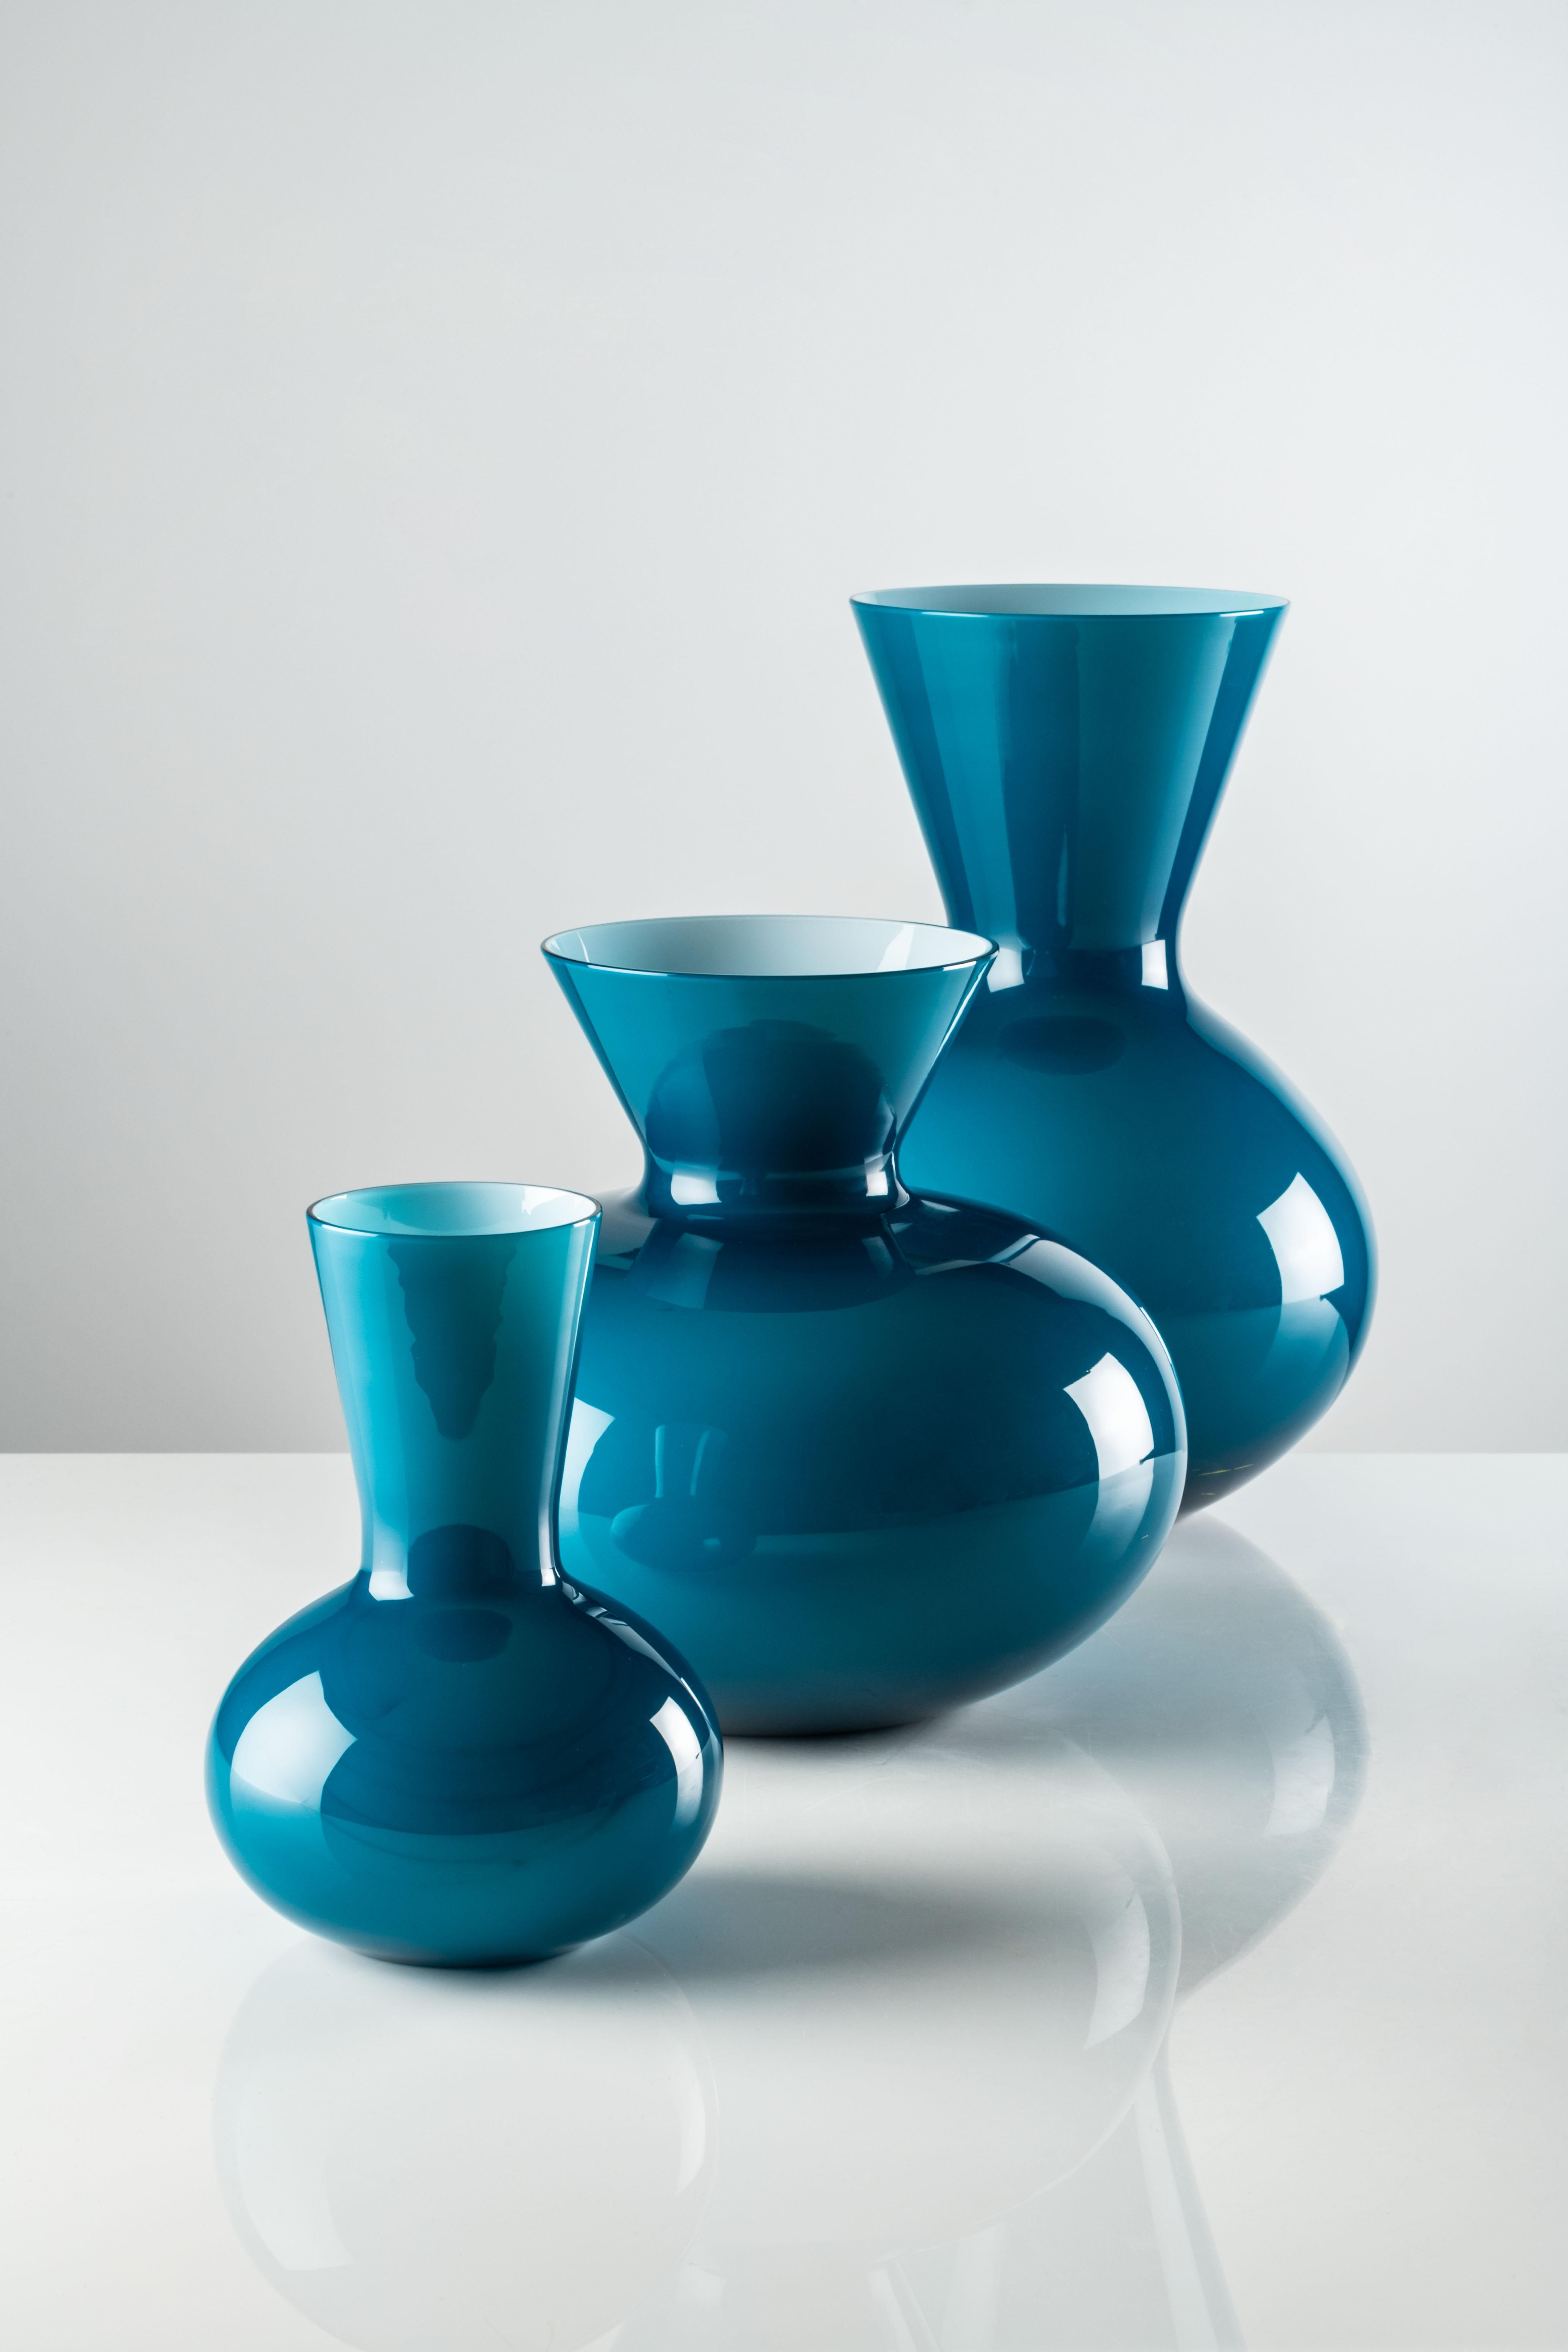 Idria large vase in horizon Murano glass by Venini. The ancient Greek water vessel sheds its skin, as terracotta gives way to glass, thanks to Venini. Its design speaks of bygone days and rhythms, bringing them back to life: timeless beauty that